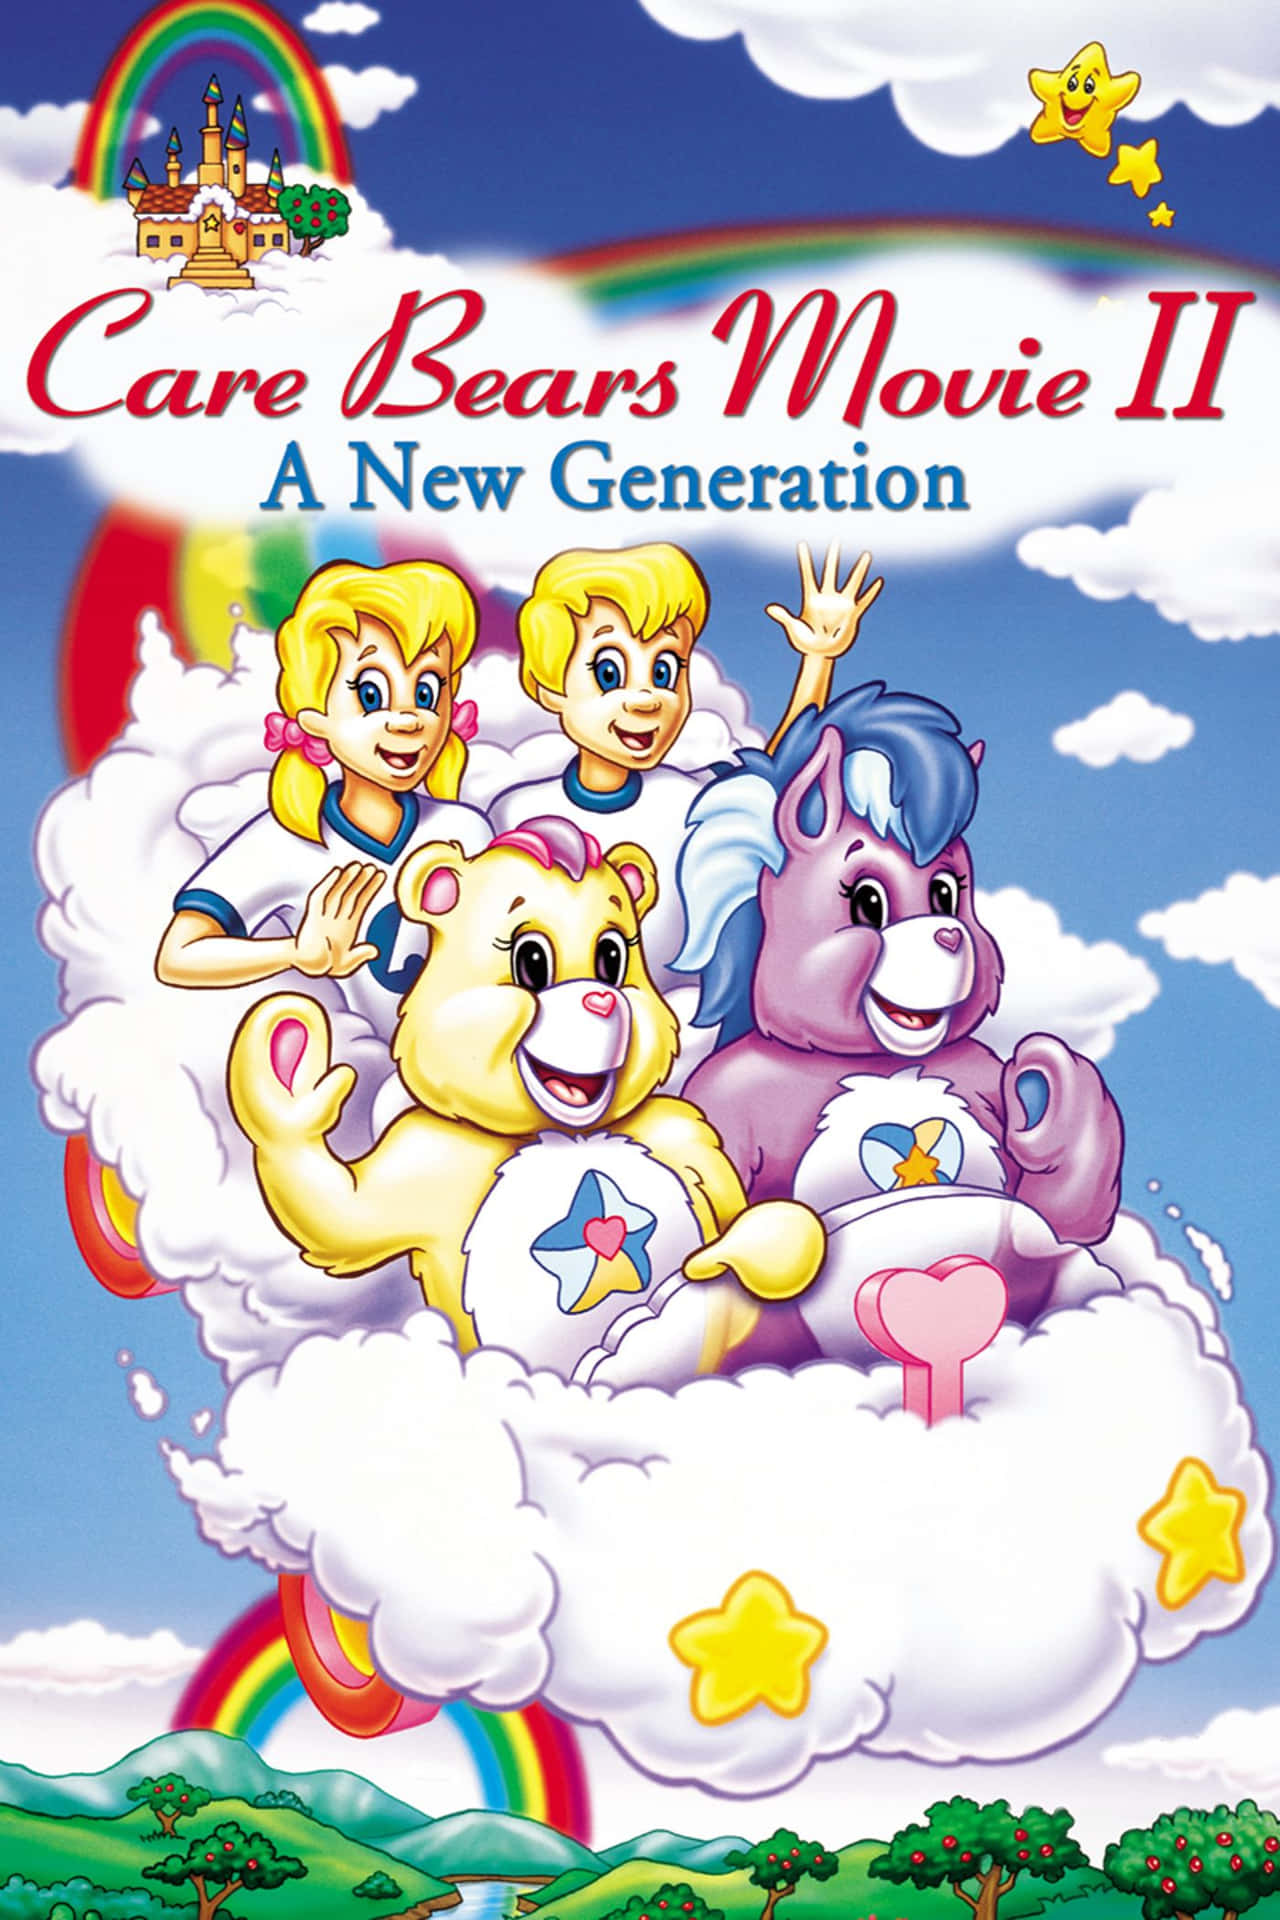 Showing the Love of Care Bears